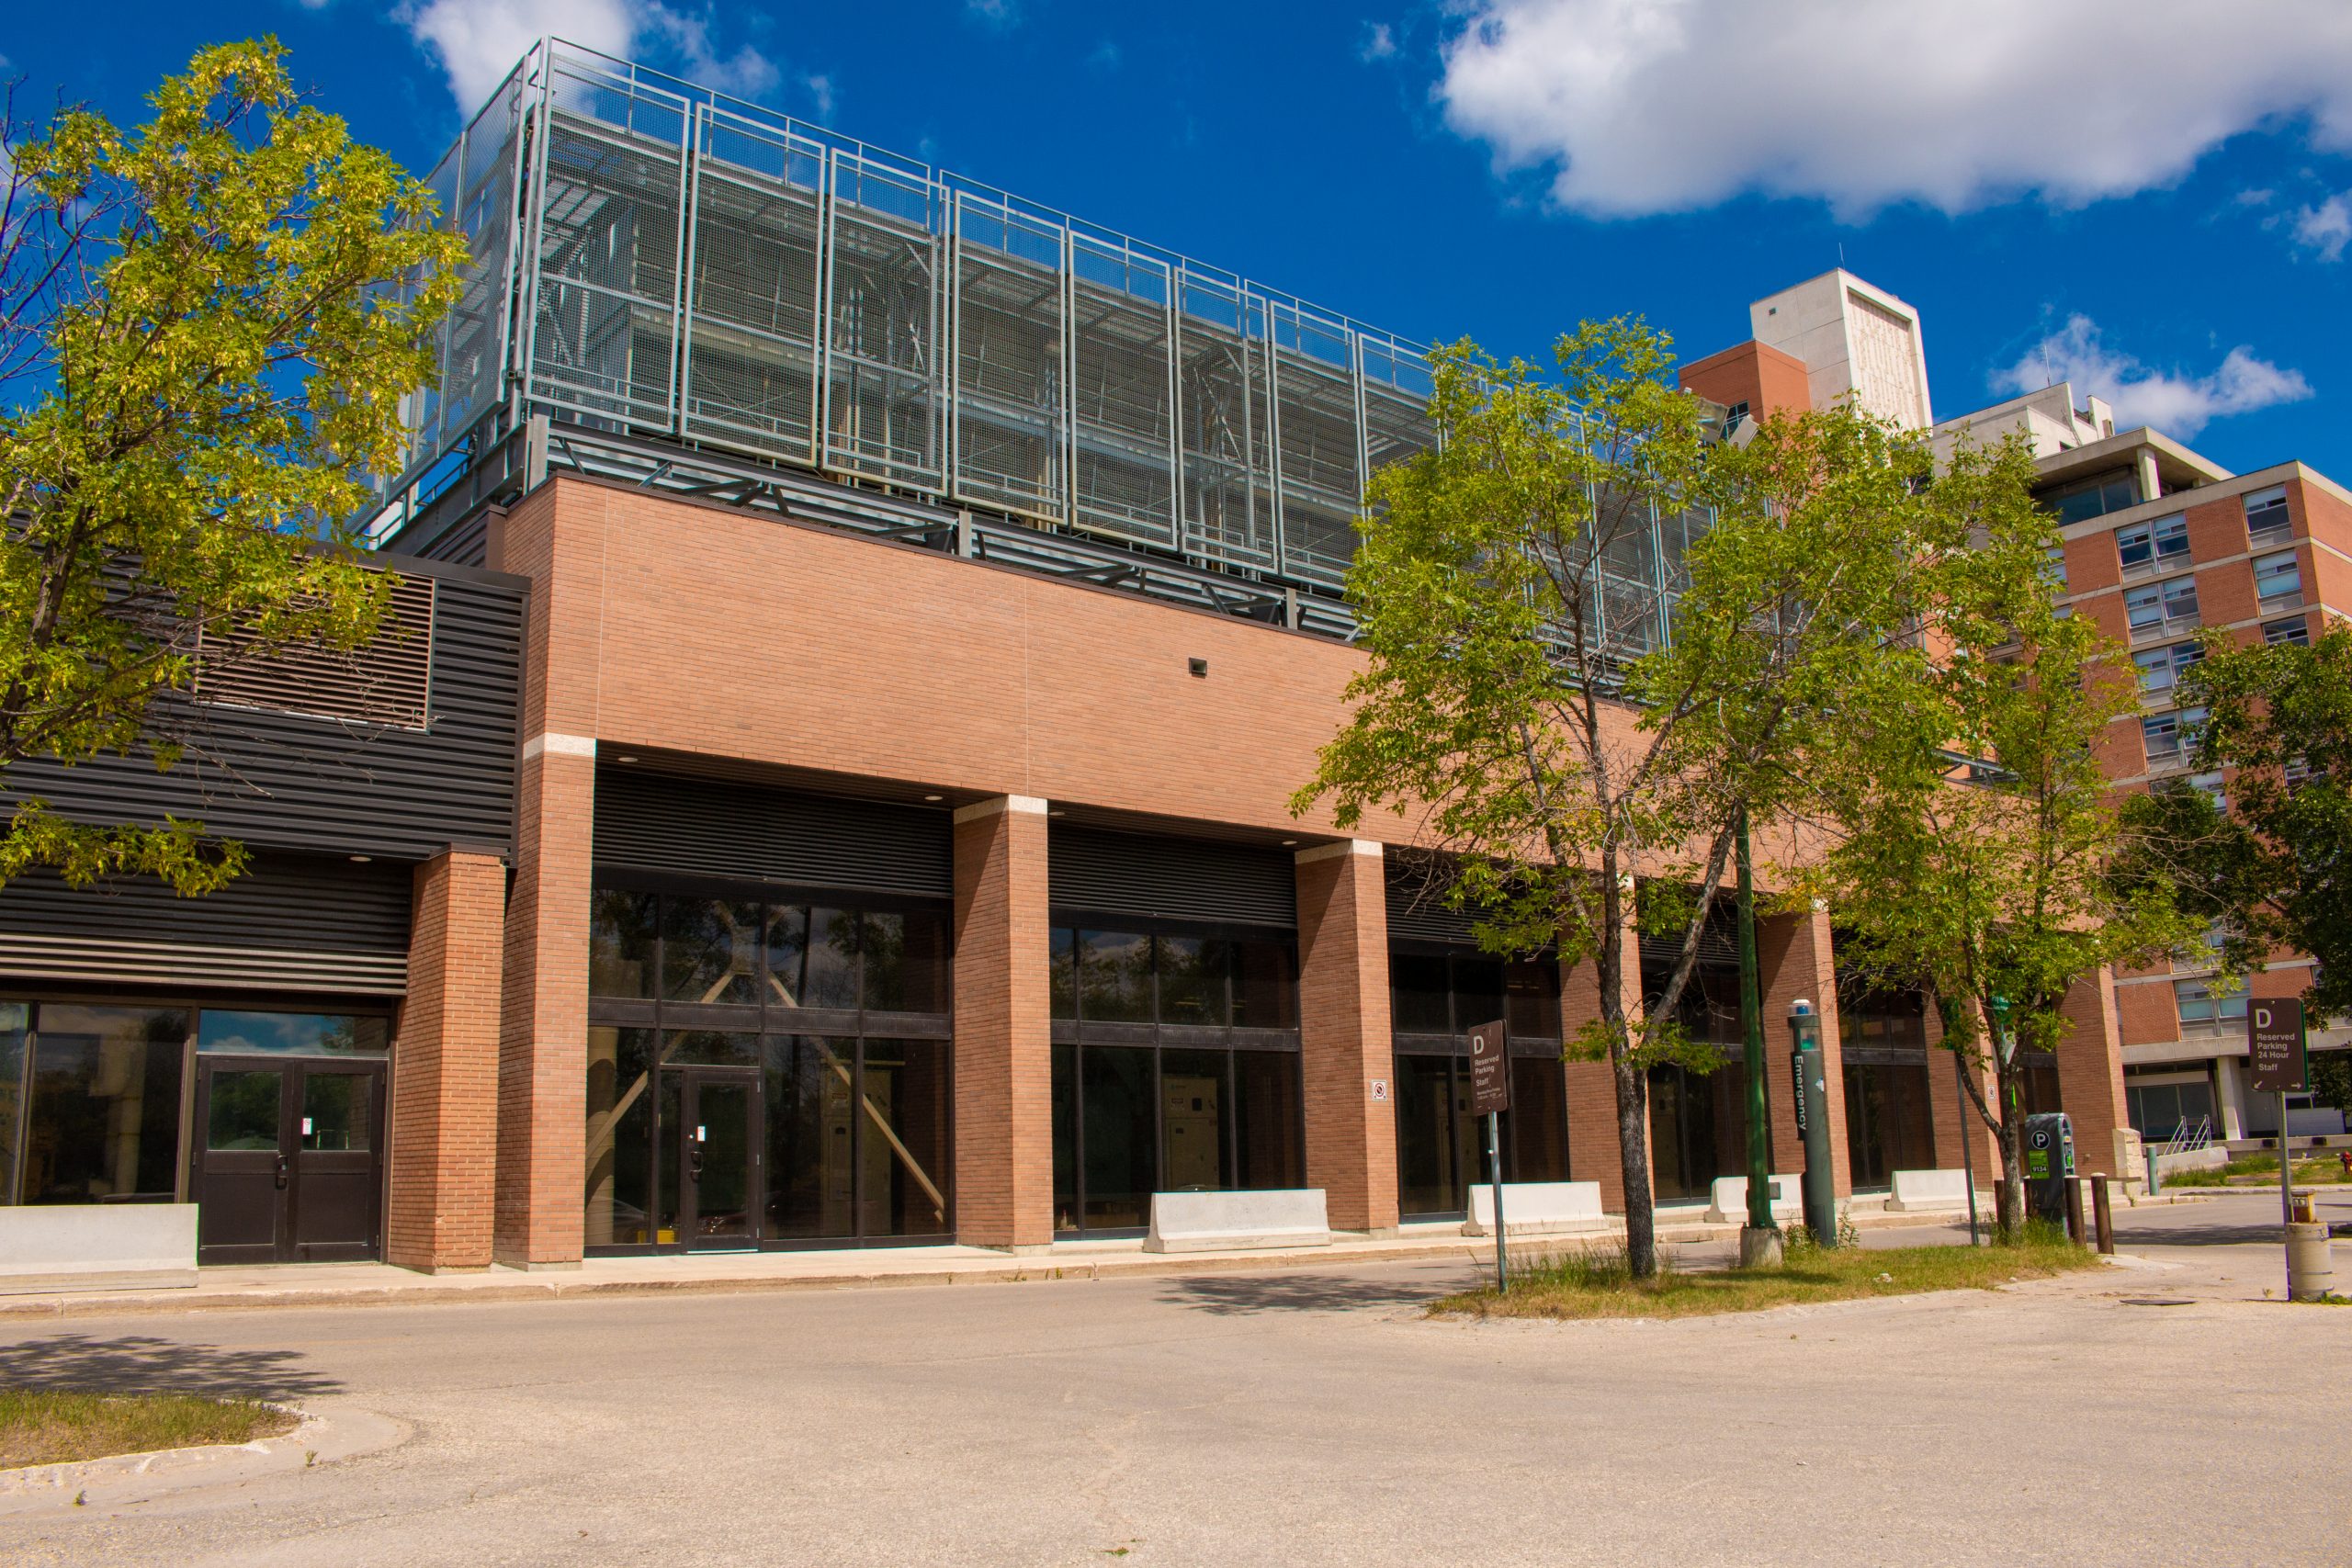 Image of the 1965 addition to the Central Energy Plant at the University of Manitoba at 33 Maclean Crescent